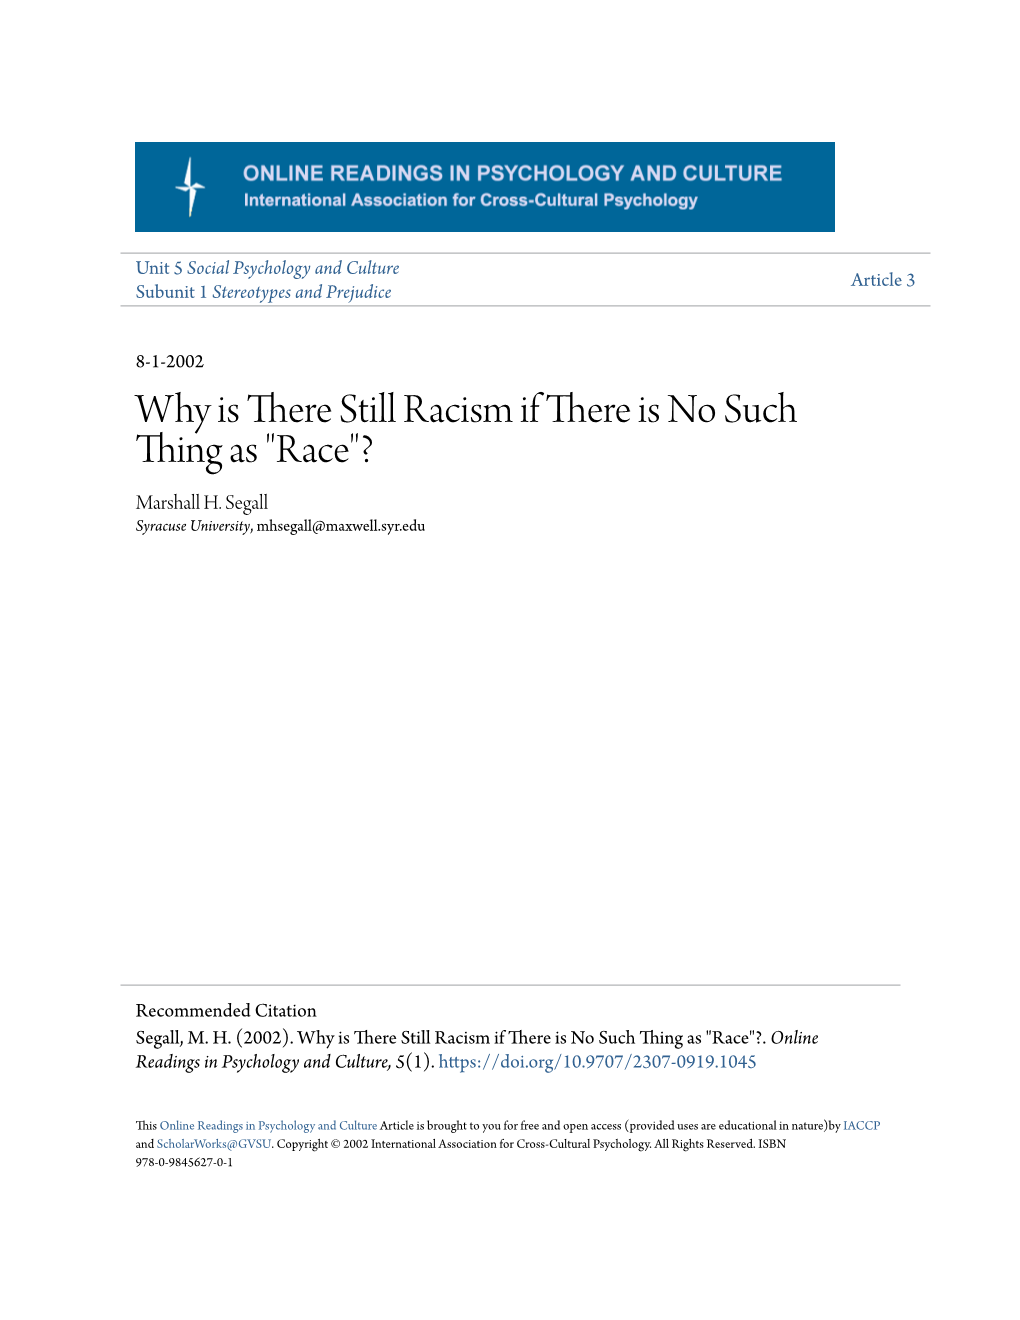 Why Is There Still Racism If There Is No Such Thing As "Race"? Marshall H